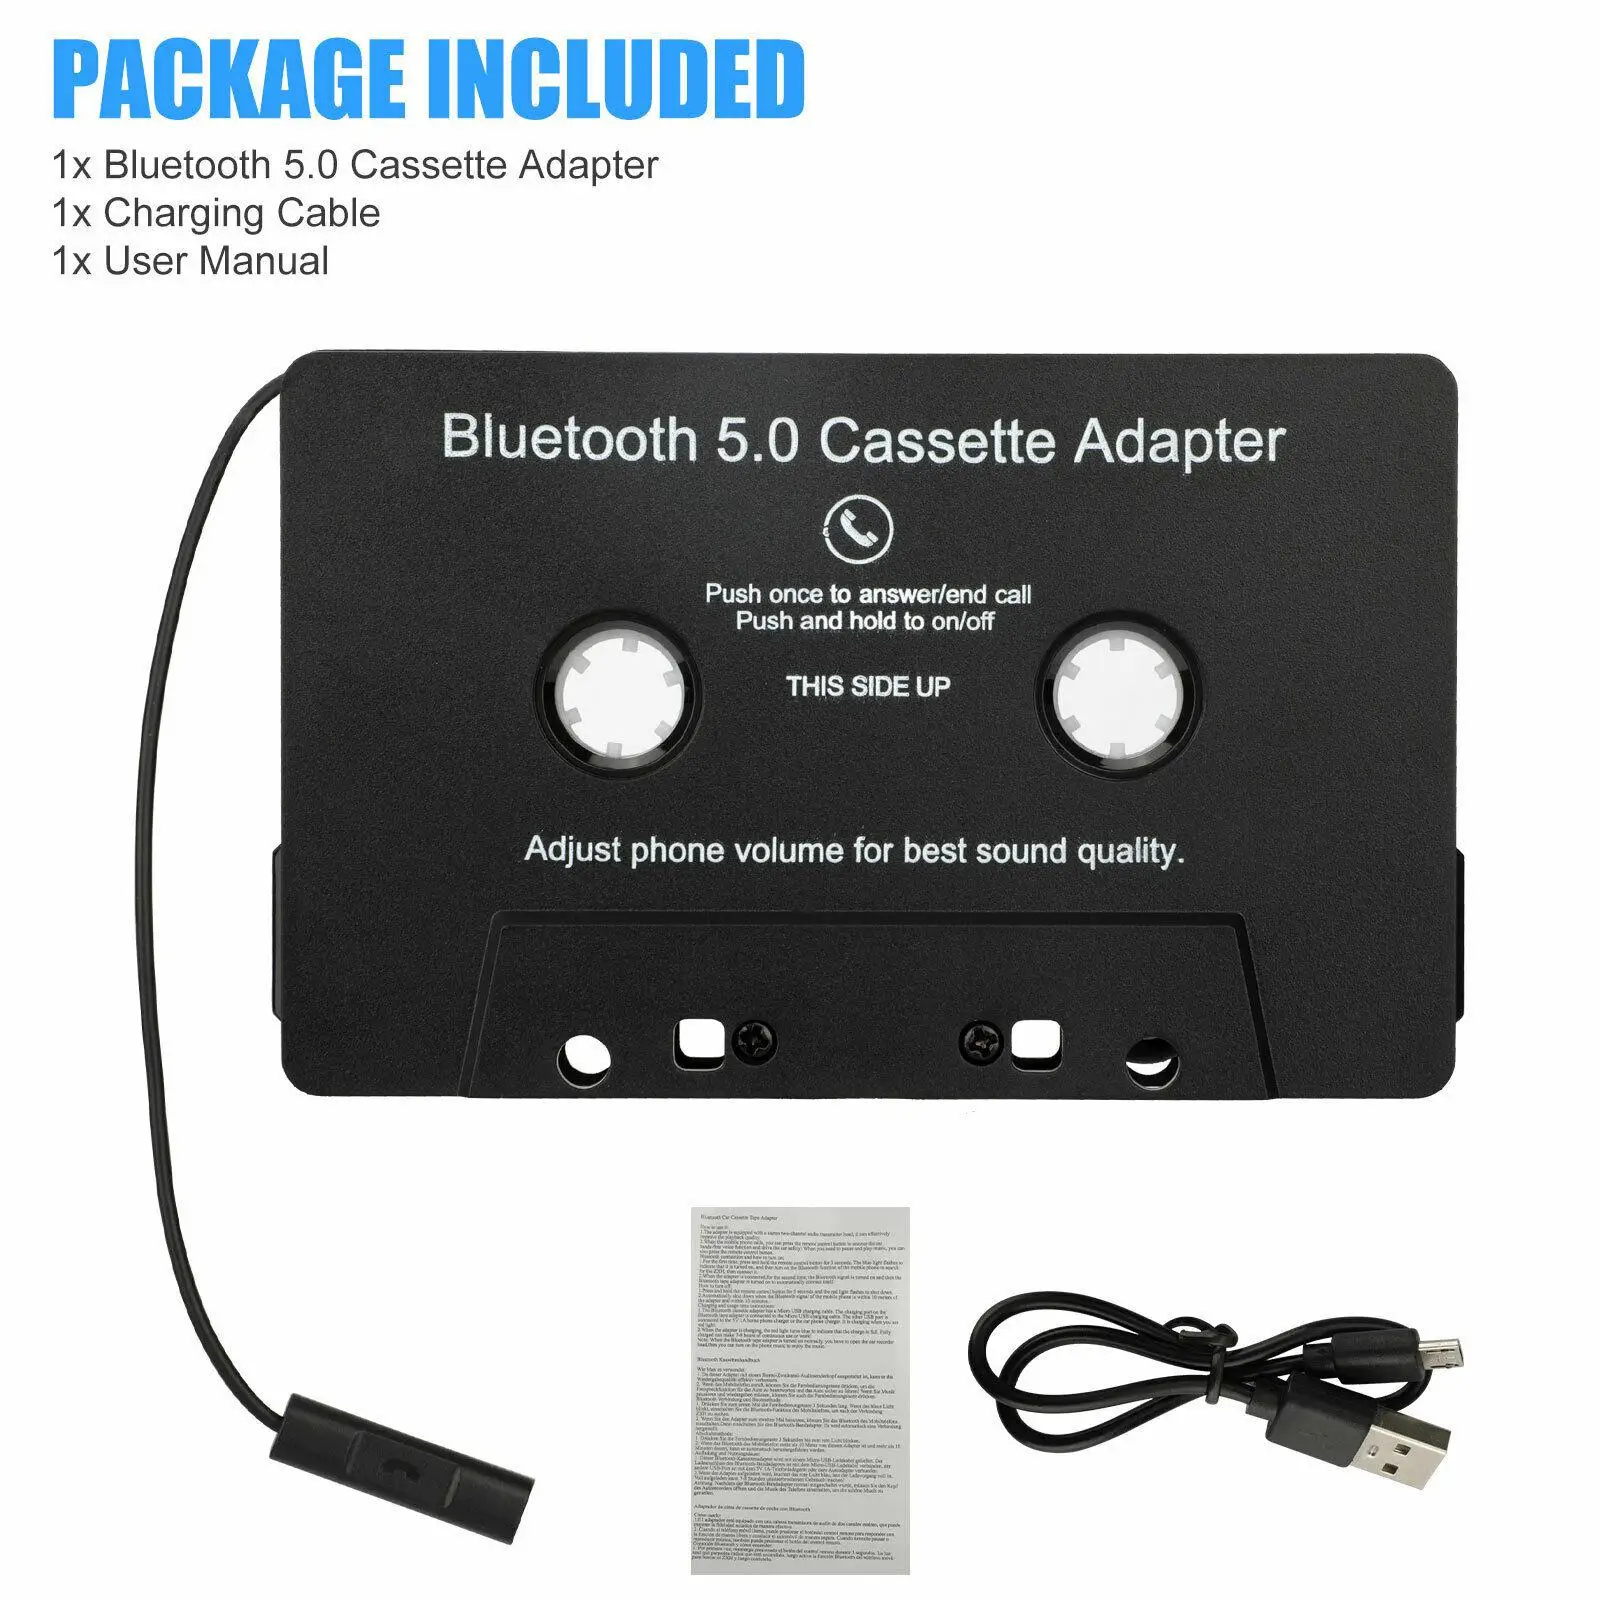 None to Aux Adapter with Stereo Audio Premium None Tape to Aux Adapter for Car, Boombox, Stereo, RV